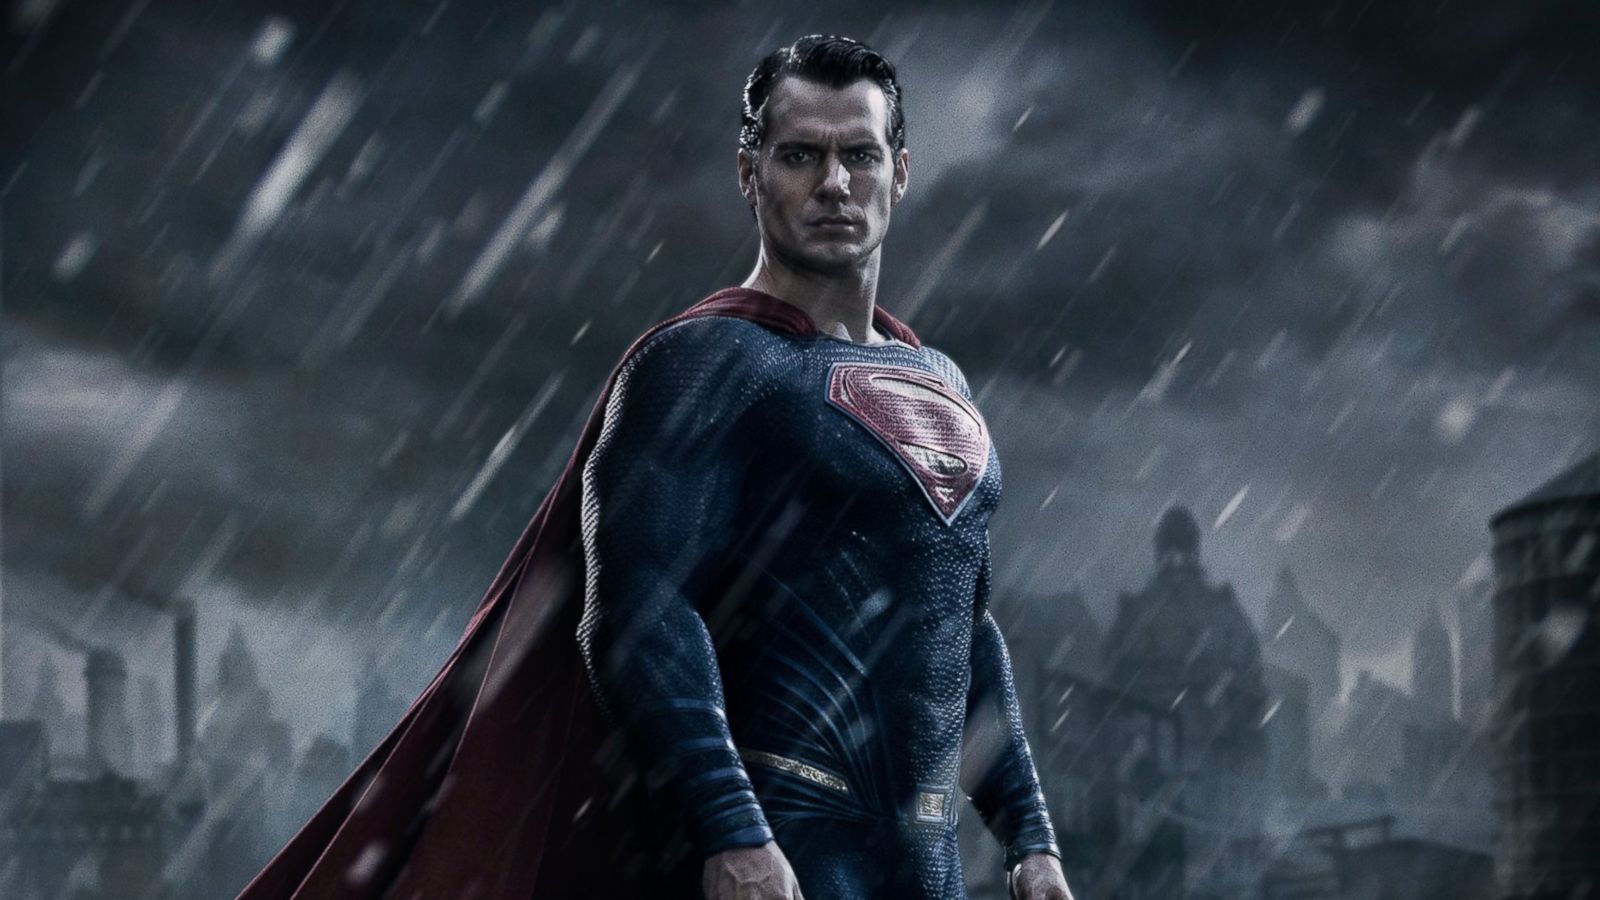 v Superman: Dawn of Justice': All About Rumored Villain Doomsday - ABC News